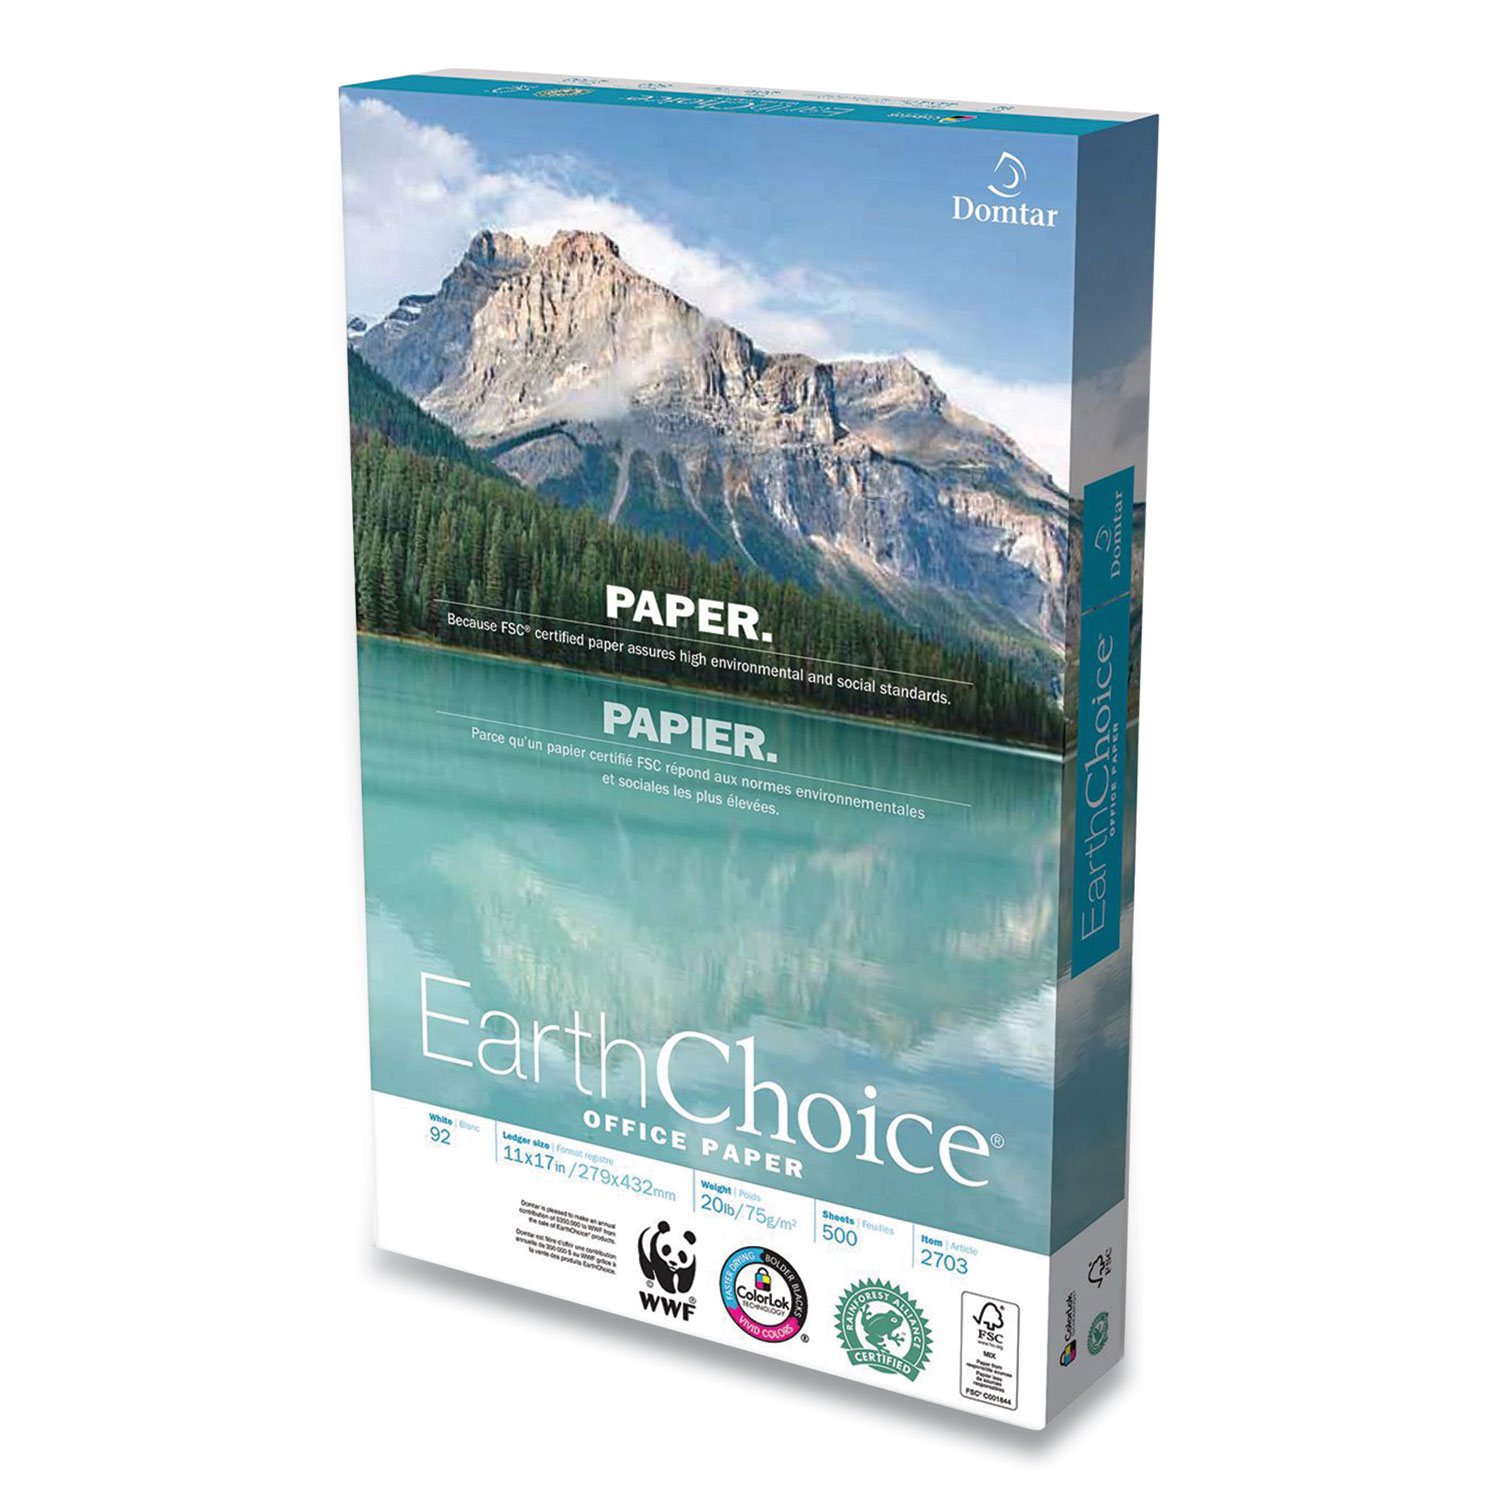  Domtar 2703 EarthChoice Office Paper, 92 Bright, 20 lb, 11 x 17, White, 500/Ream (DMR755068) 